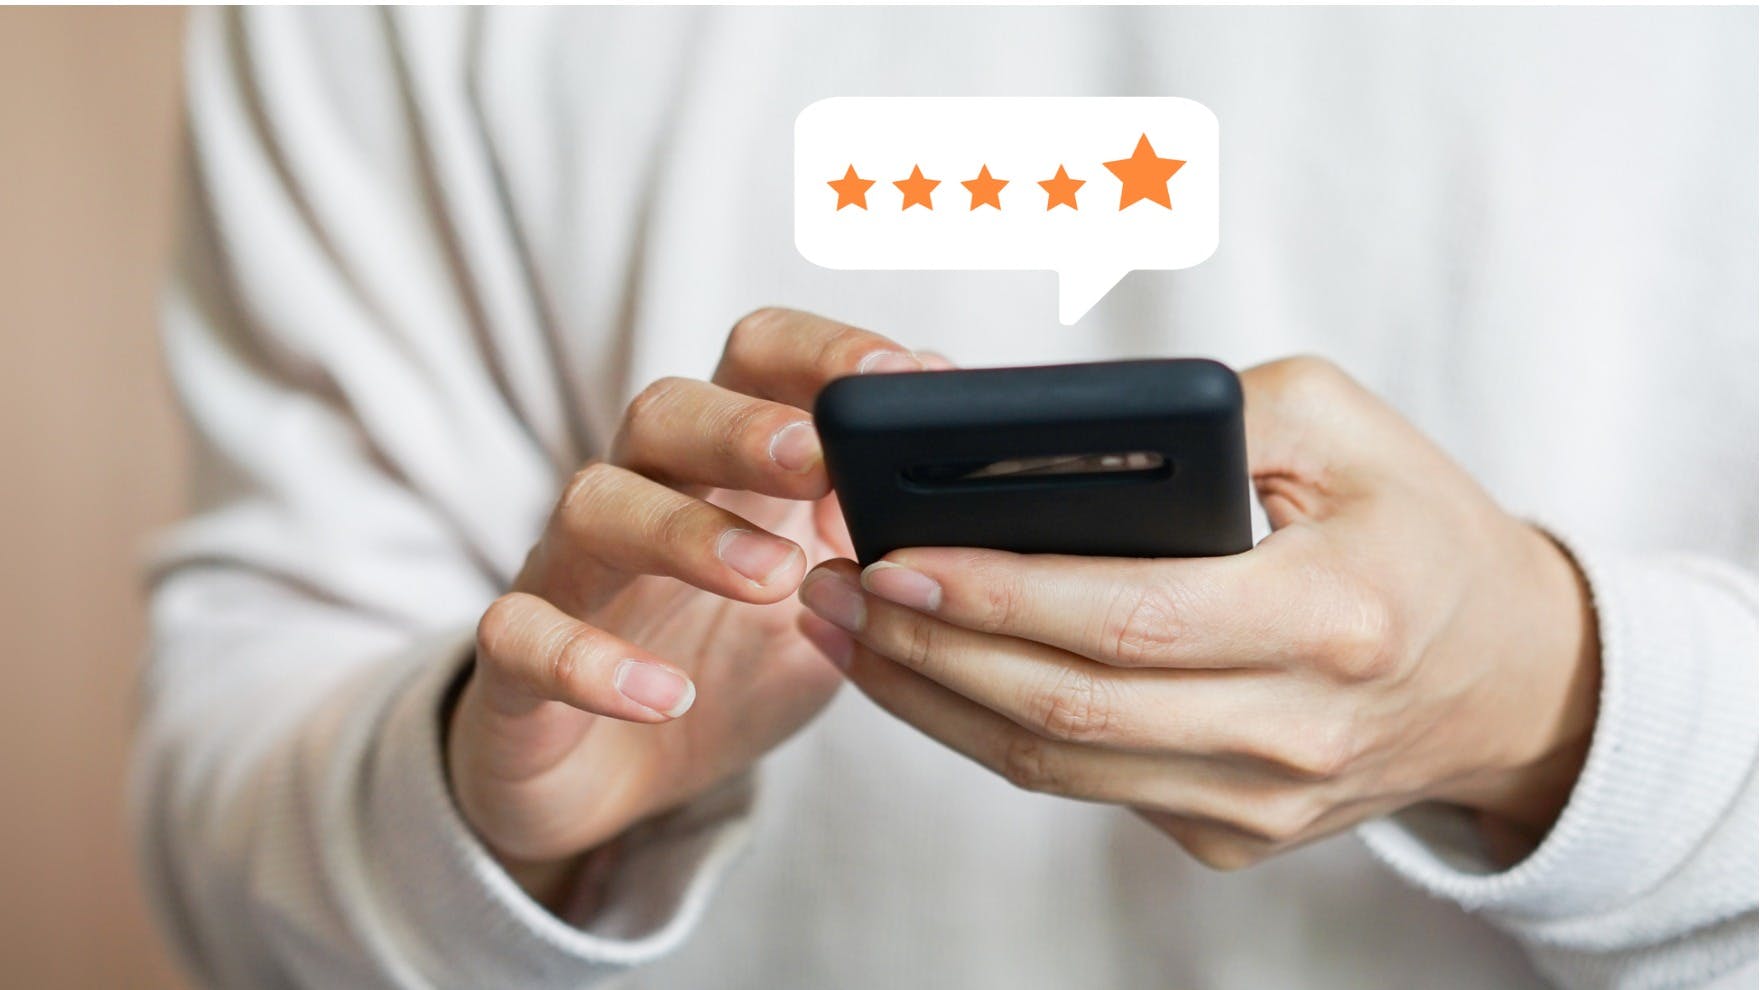 How to Use Customer Reviews to Improve Your Sales Campaigns